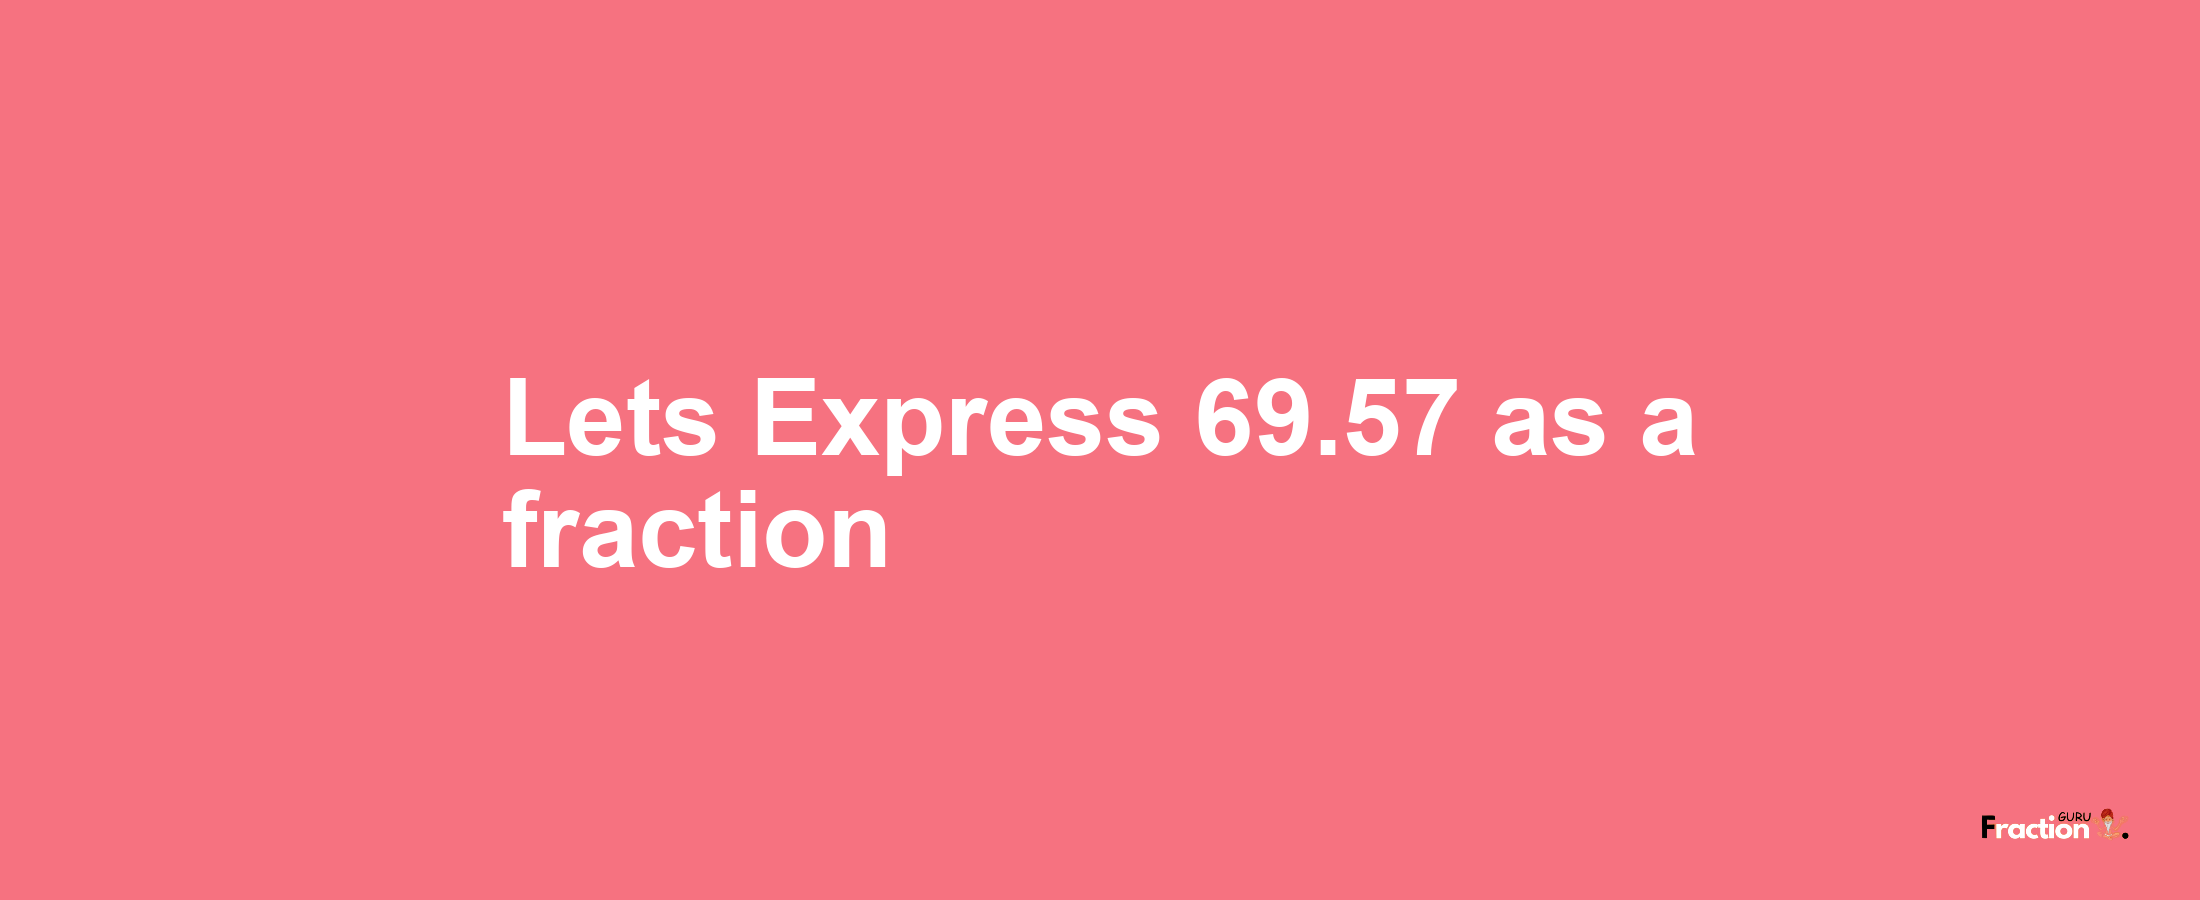 Lets Express 69.57 as afraction